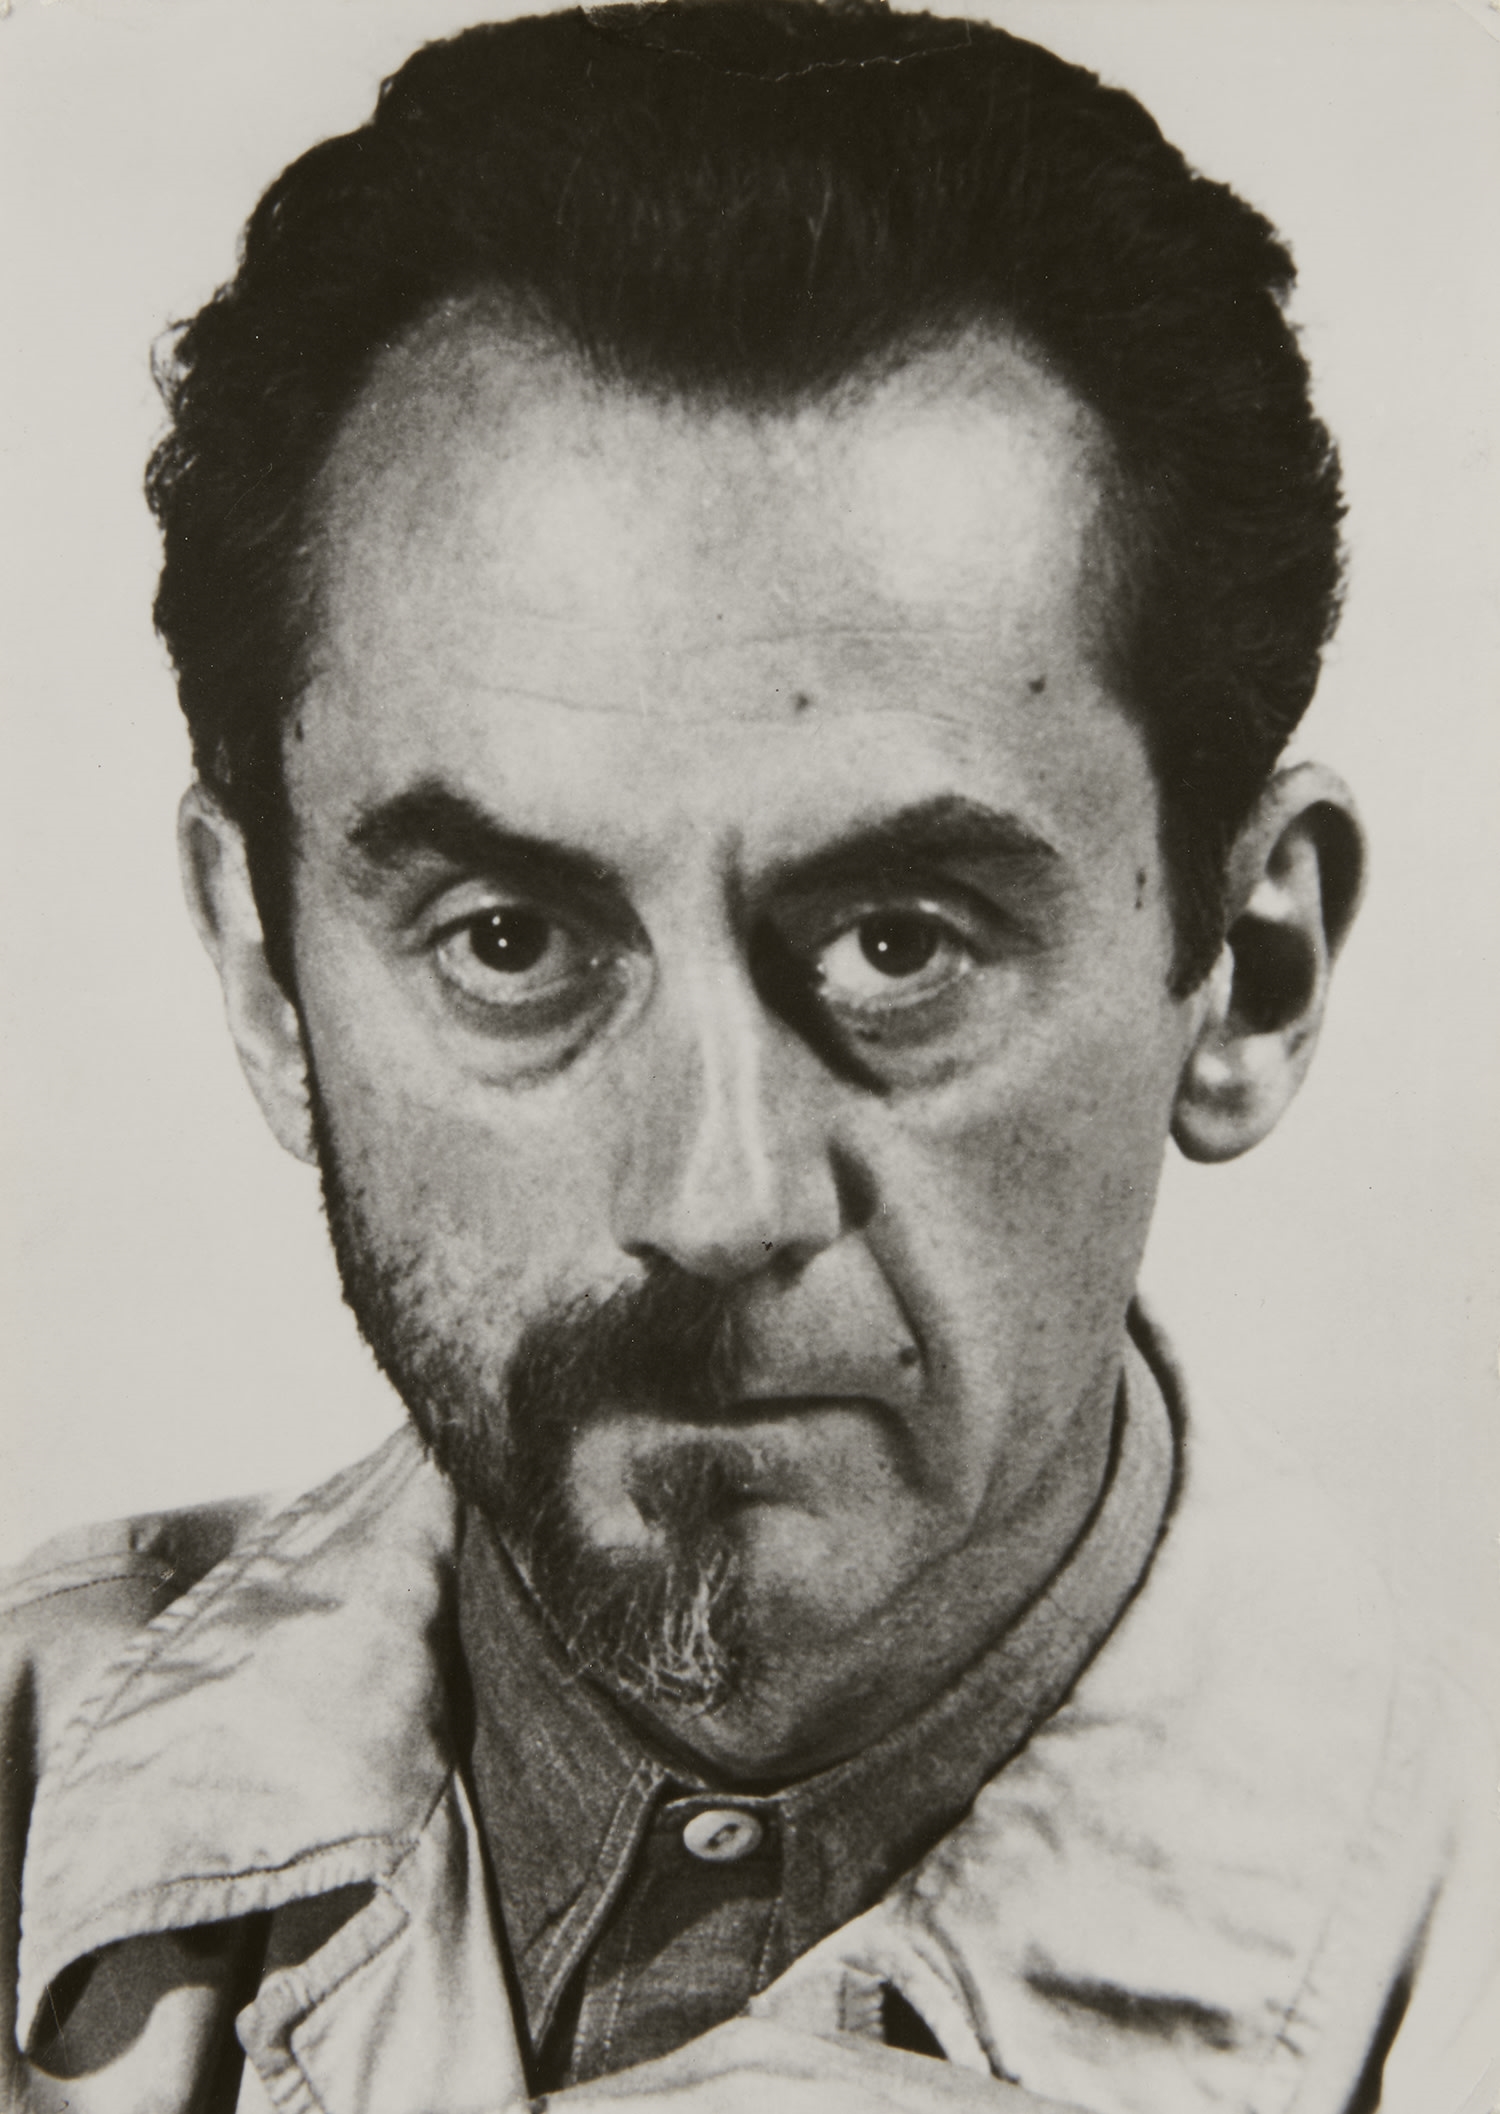 Artwork by Man Ray, Self Portrait with Half Beard, Hollywood, Made of Gelatin silver print, printed later.